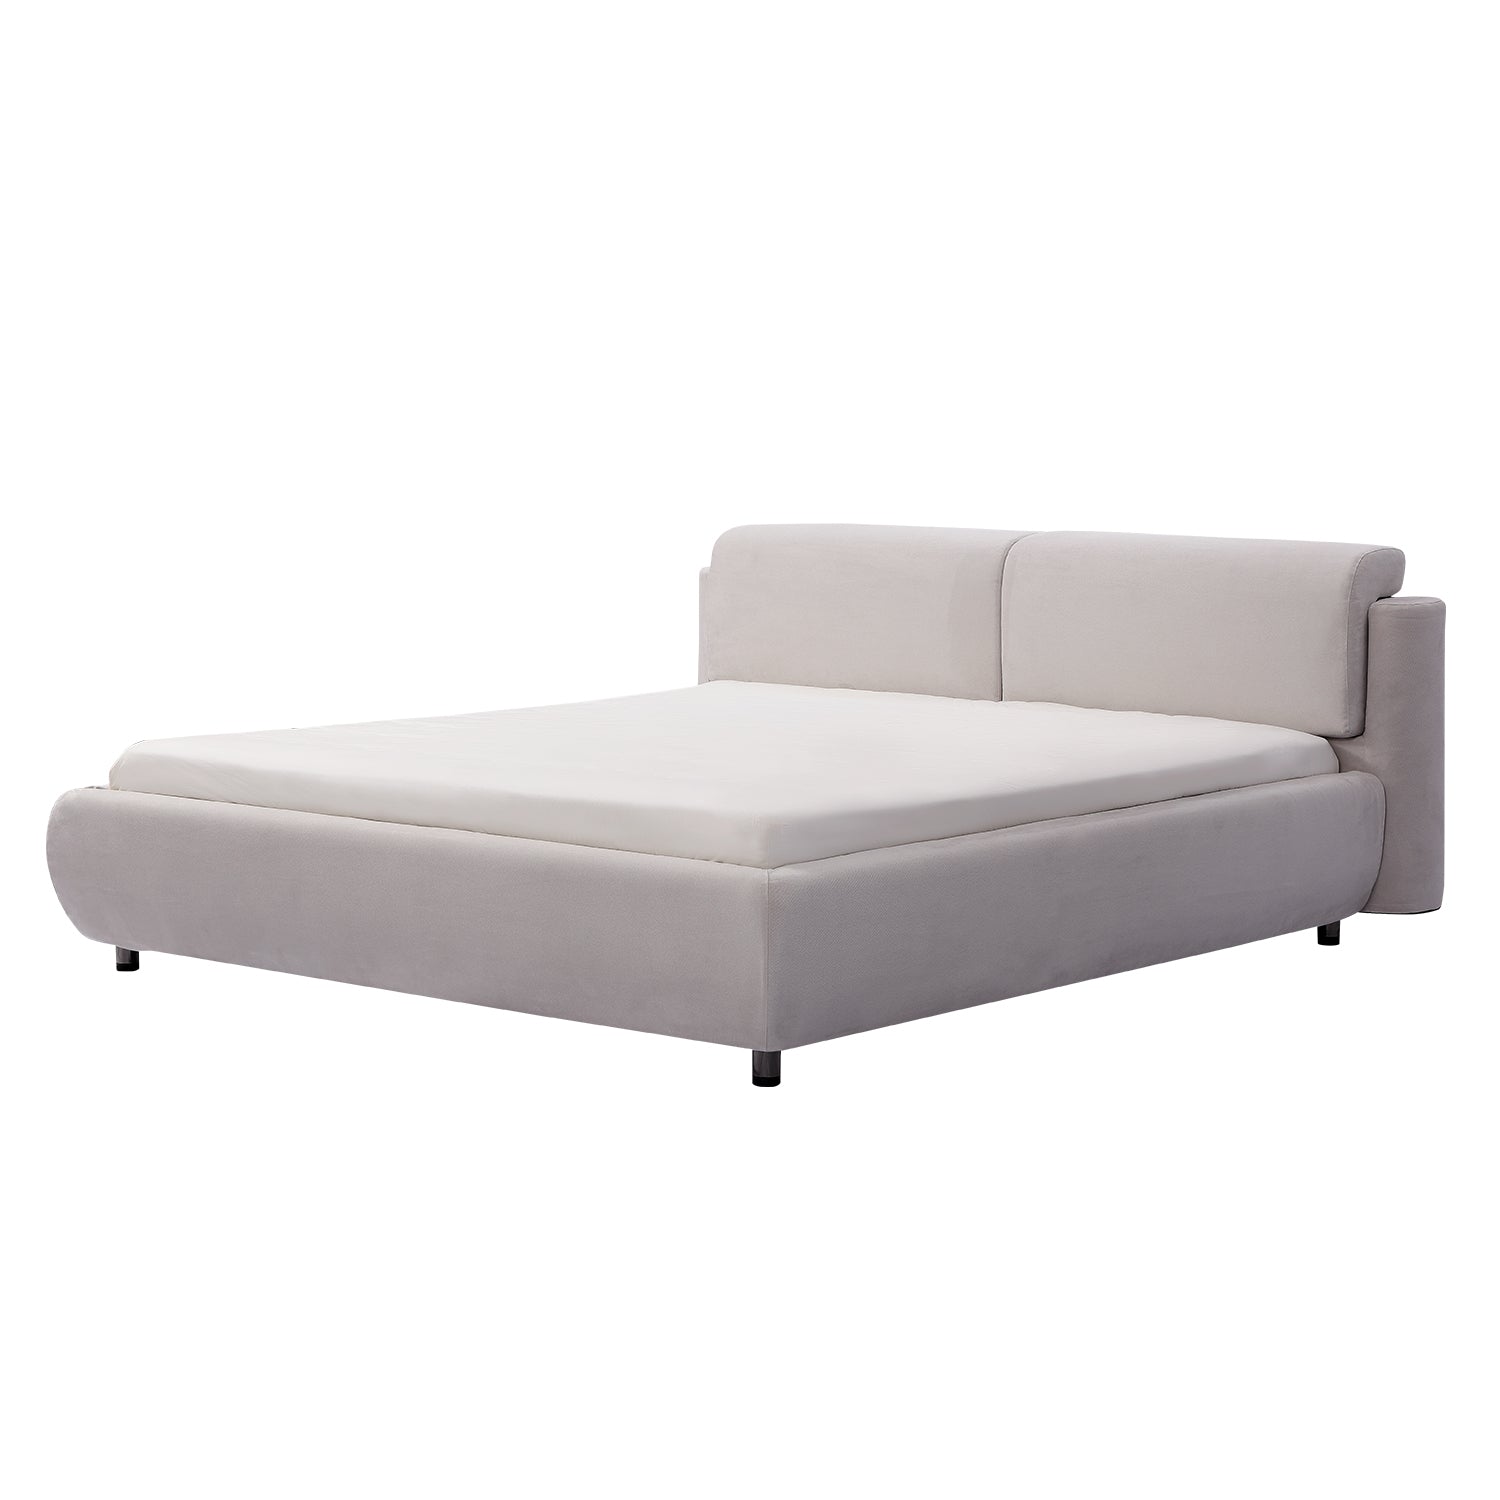 DeRUCCI Bed Frame BZZ4 - 082 in light grey fabric with modern minimalist design, padded headboard, and European contemporary characteristics.